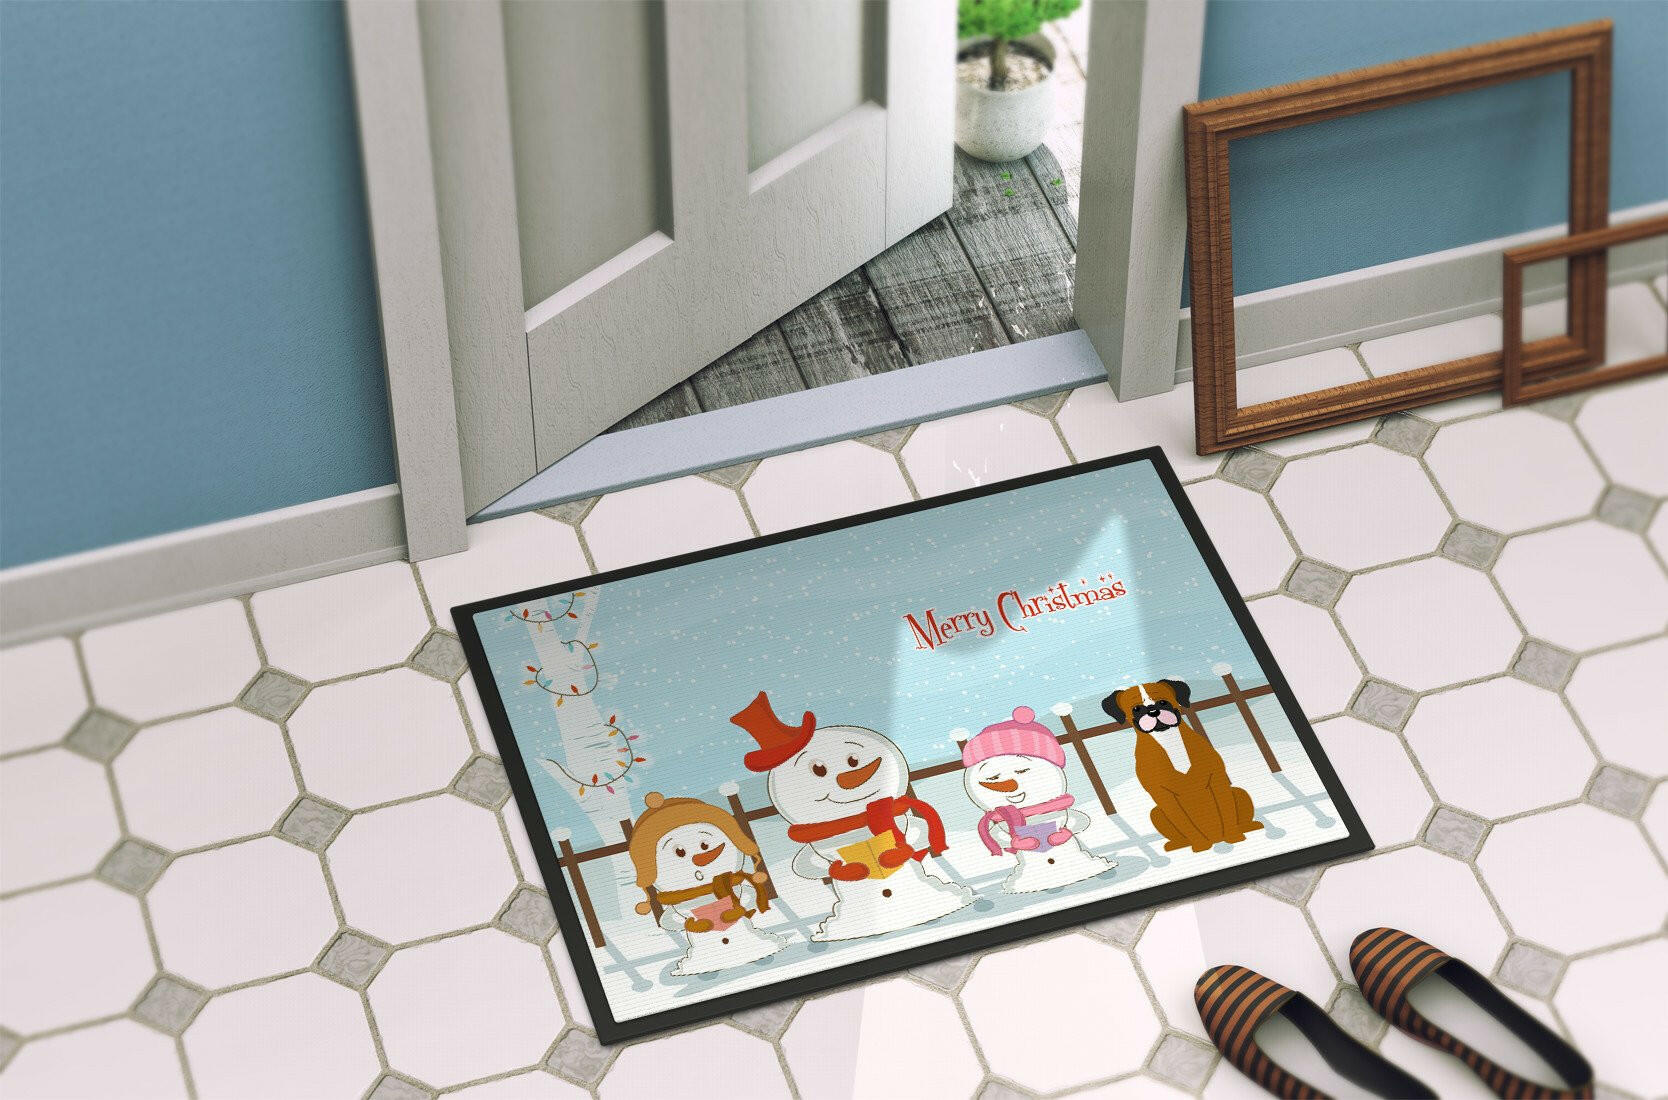 Merry Christmas Carolers Flashy Fawn Boxer Indoor or Outdoor Mat 24x36 BB2447JMAT - the-store.com